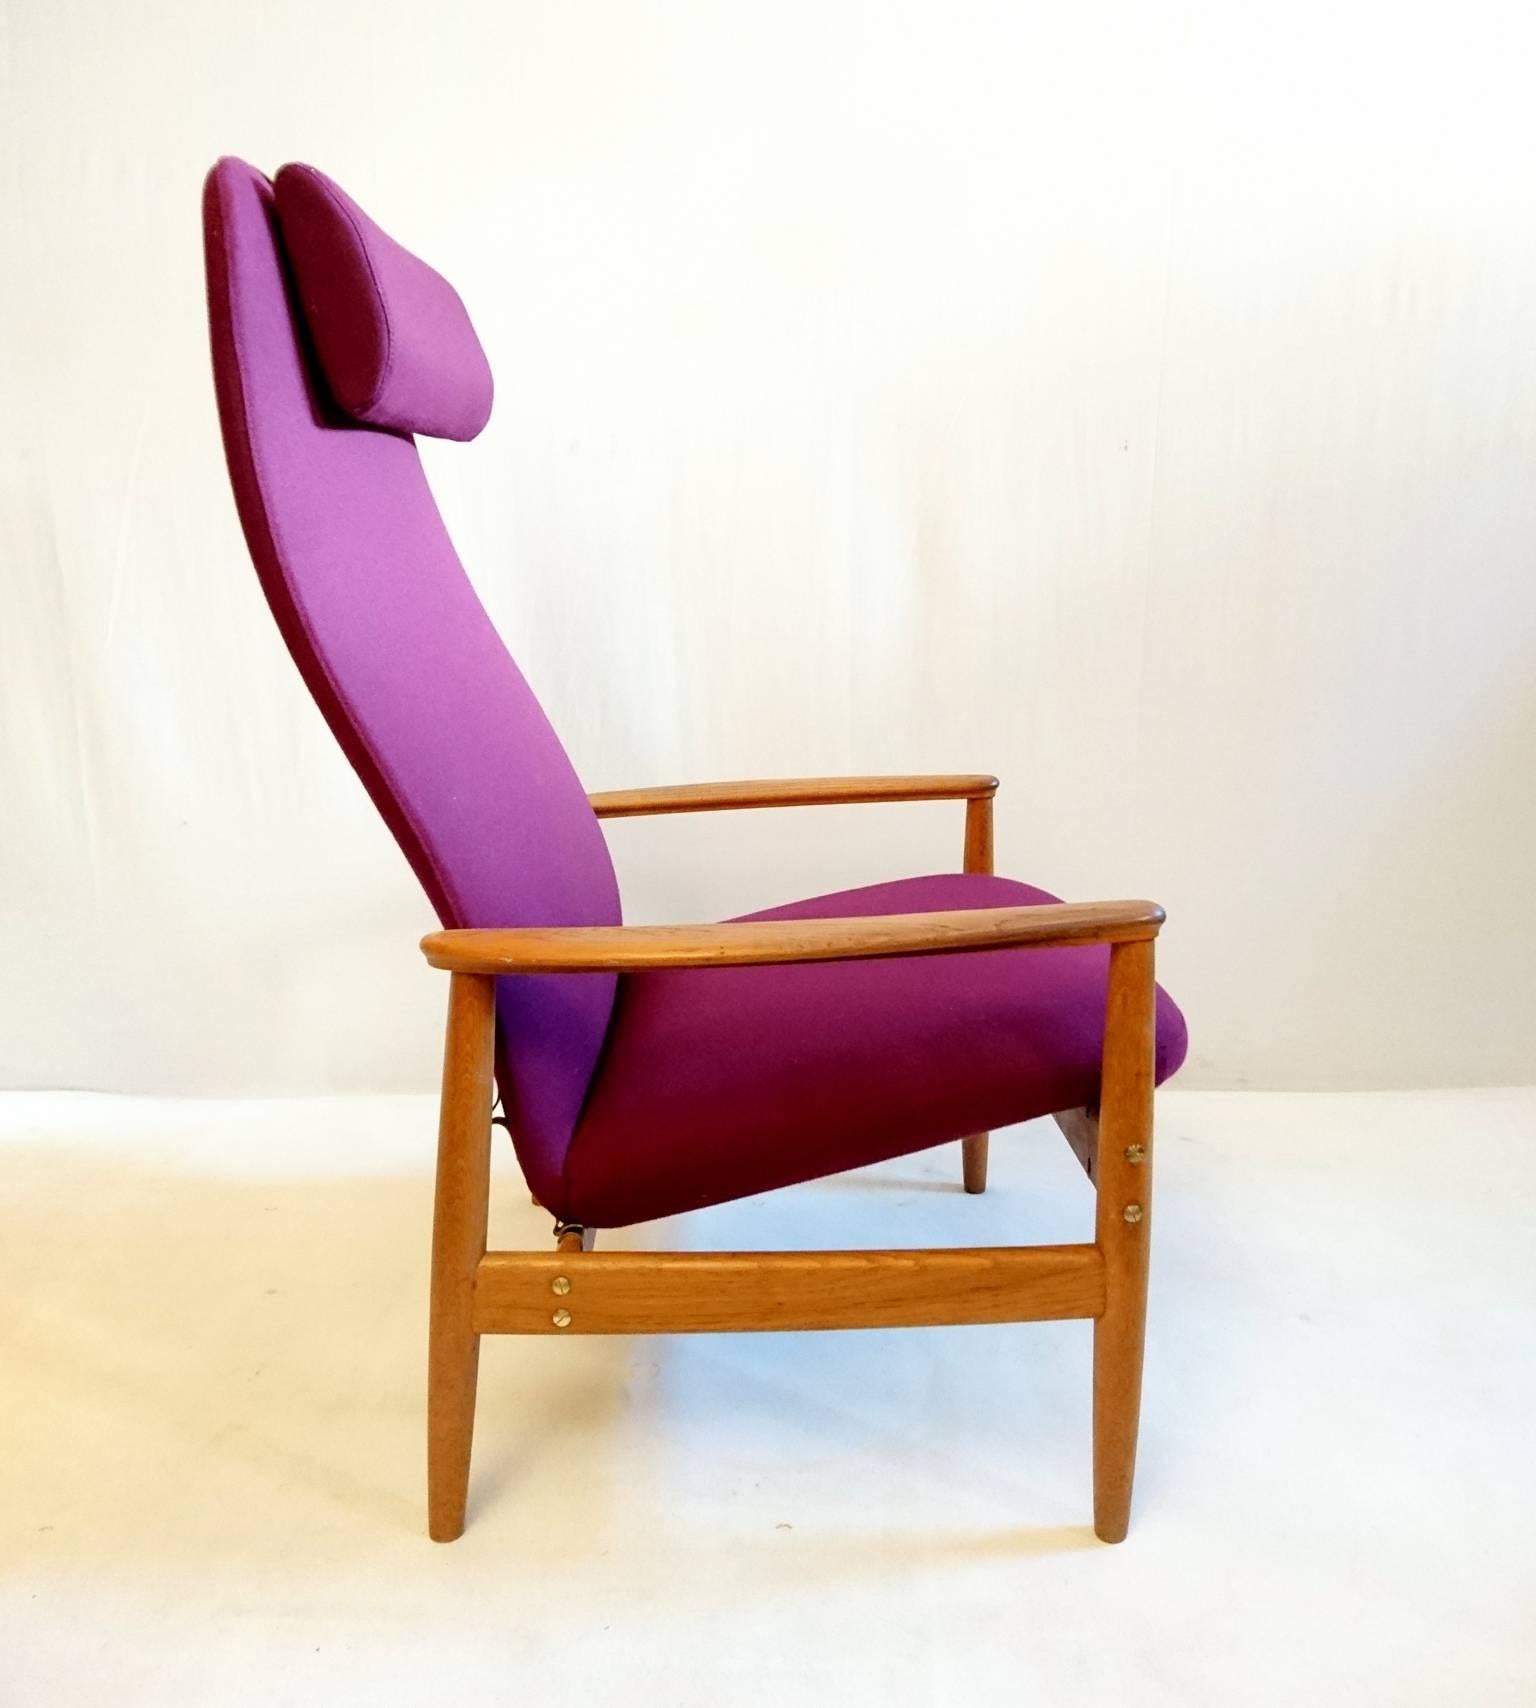 Armchair model "Contour-Set 327" by Alf Svensson for Bra Bohag, Ljungs Industrier AB, Sweden. Can be adjusted for two different positions. Completely professionally refurbished and reupholstered in an Italian plum colored virgin wool.